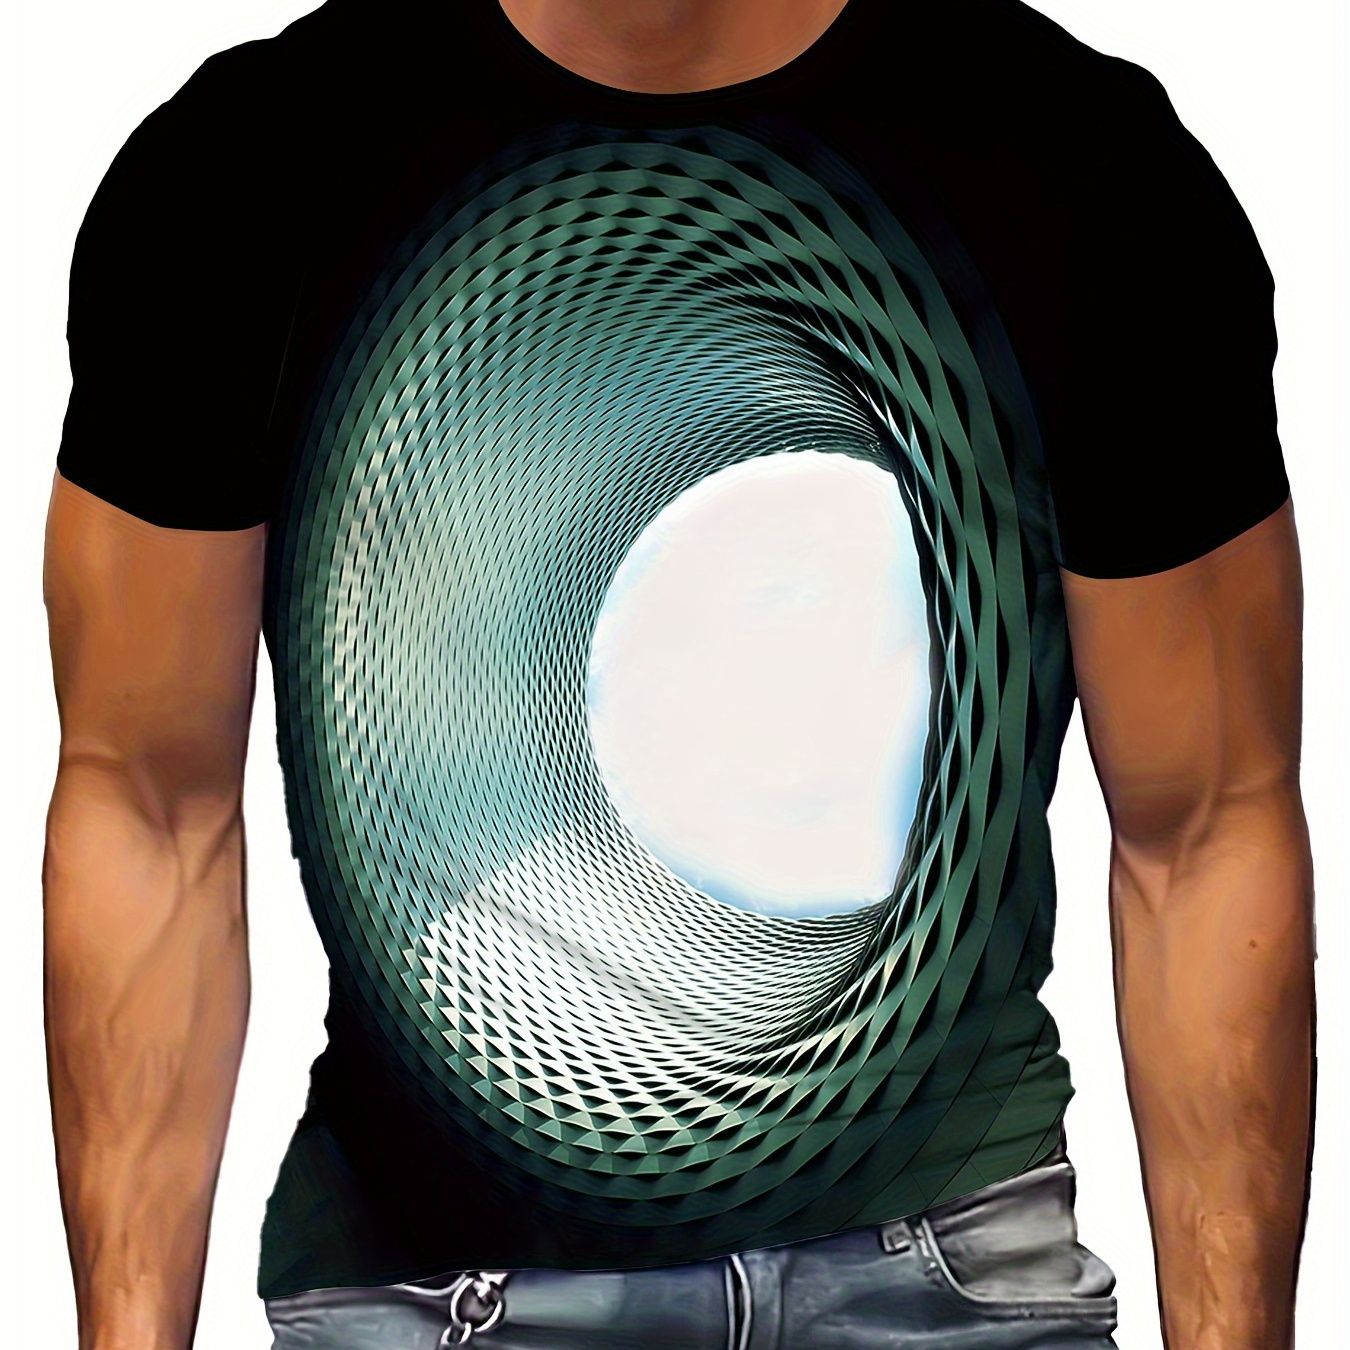 

Creative Ultra-realistic Vortex Print, Men's Graphic Design Crew Neck Active T-shirt, Casual Comfy Tees Tshirts For Summer, Men's Clothing Tops For Daily Gym Workout Running